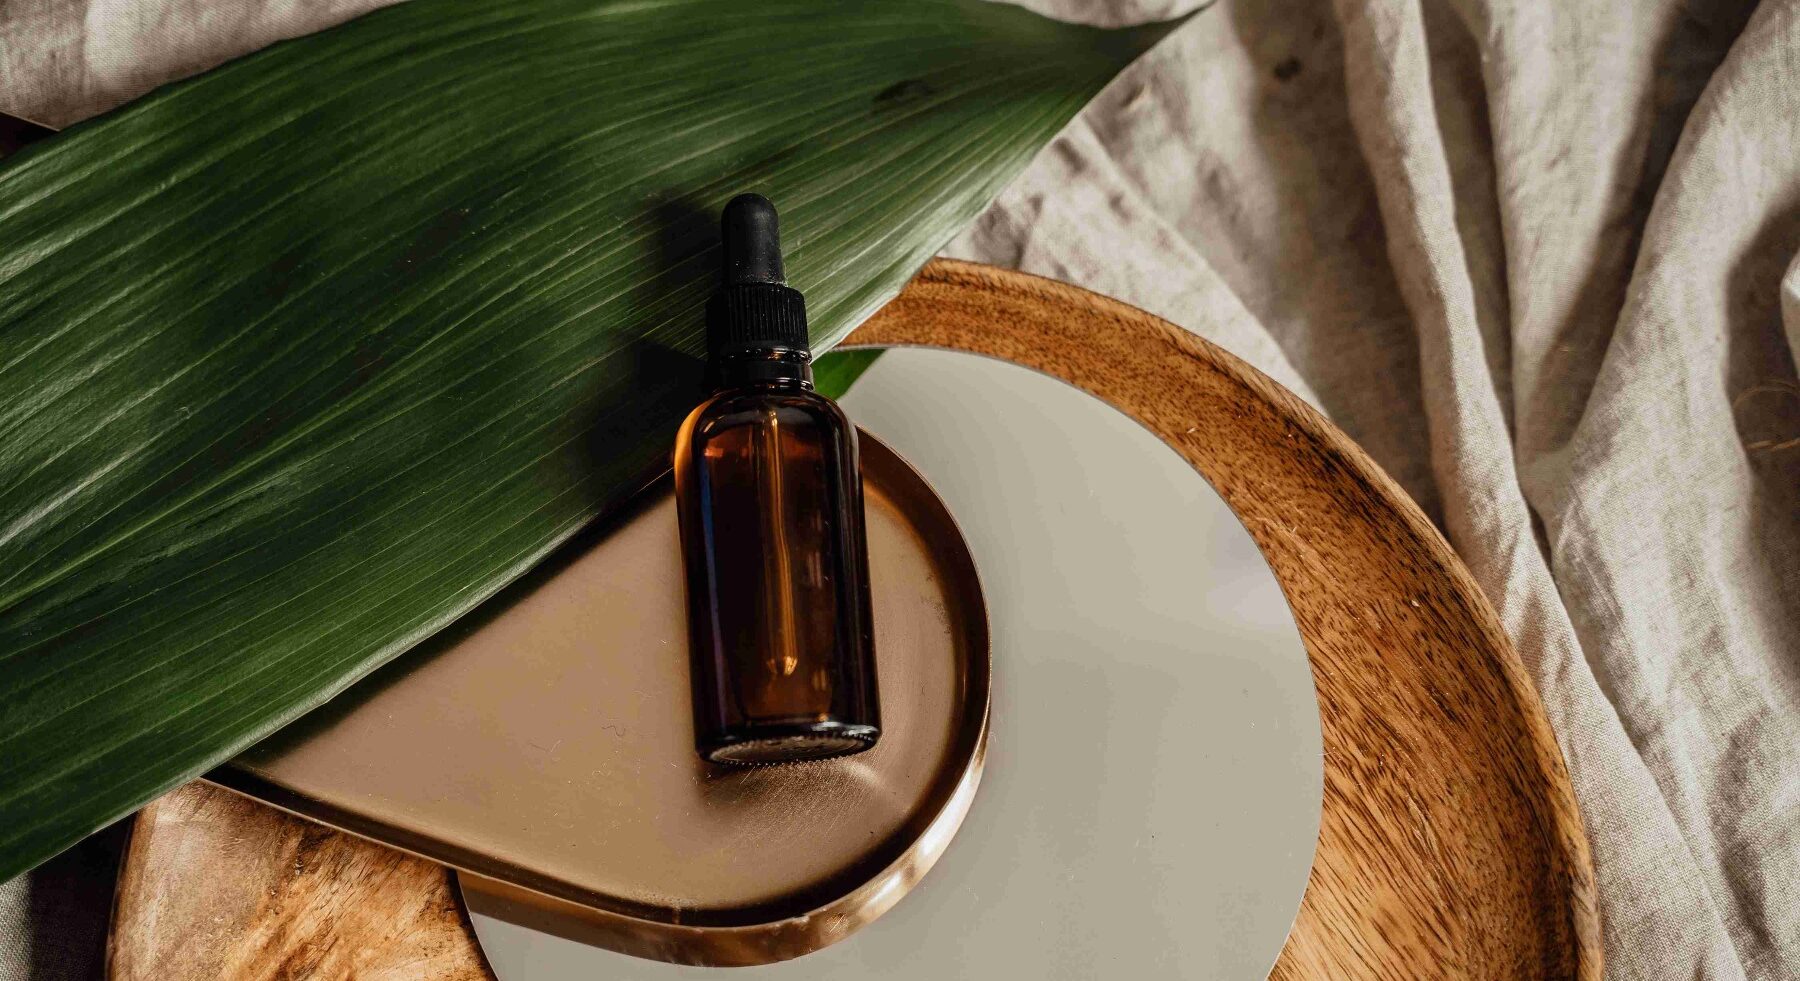 bamboo leaf hair oil extract - Bamboo Leaf Benefits